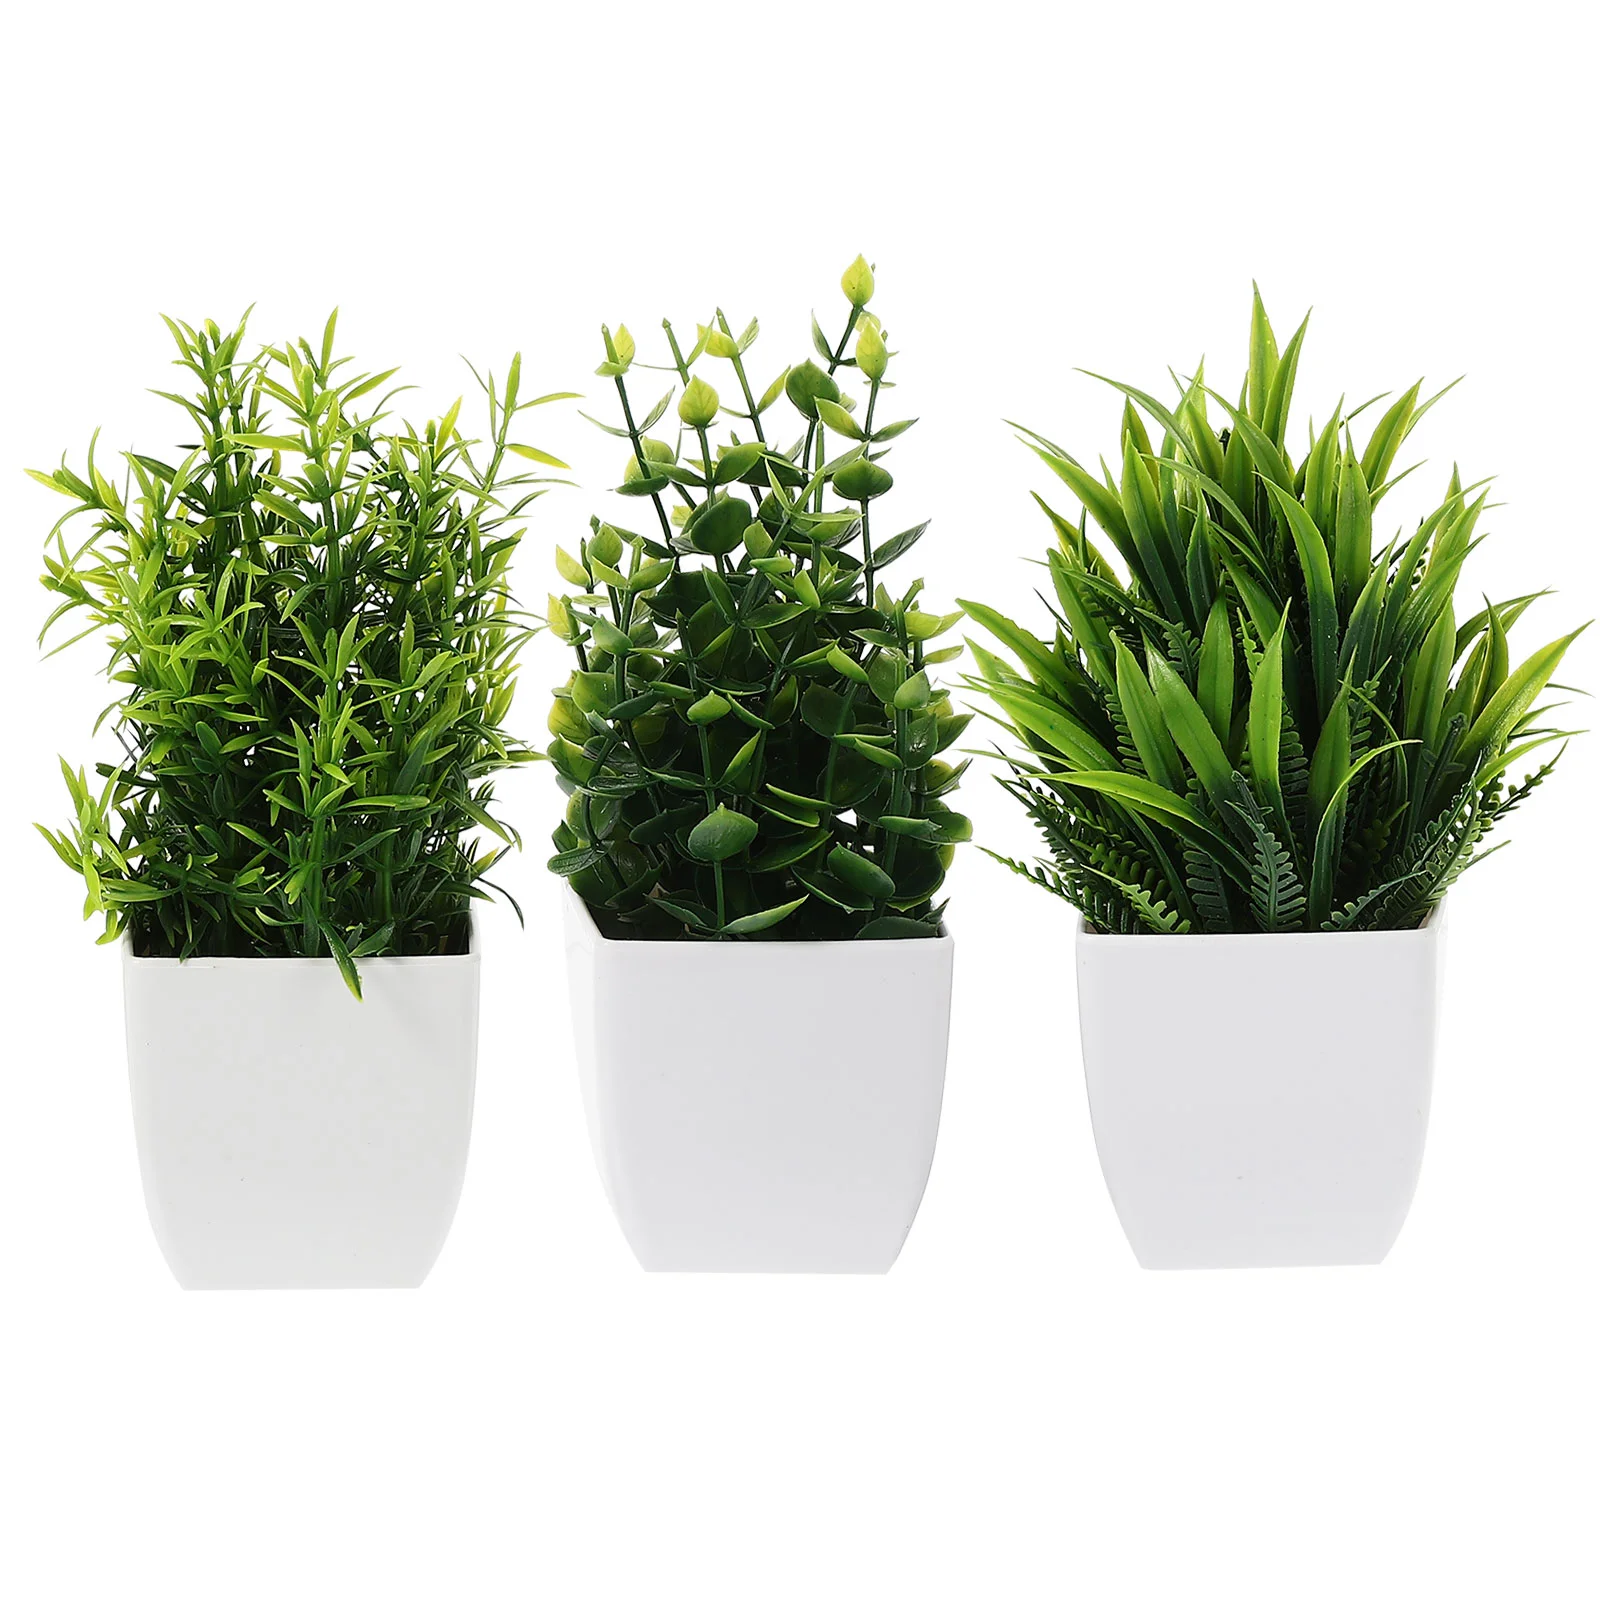 

3 Pcs Simulated Potted Plant Small Home Decor Fake Desktop Adornments Plants Artificial Bonsai Pp Office Faux Indoor